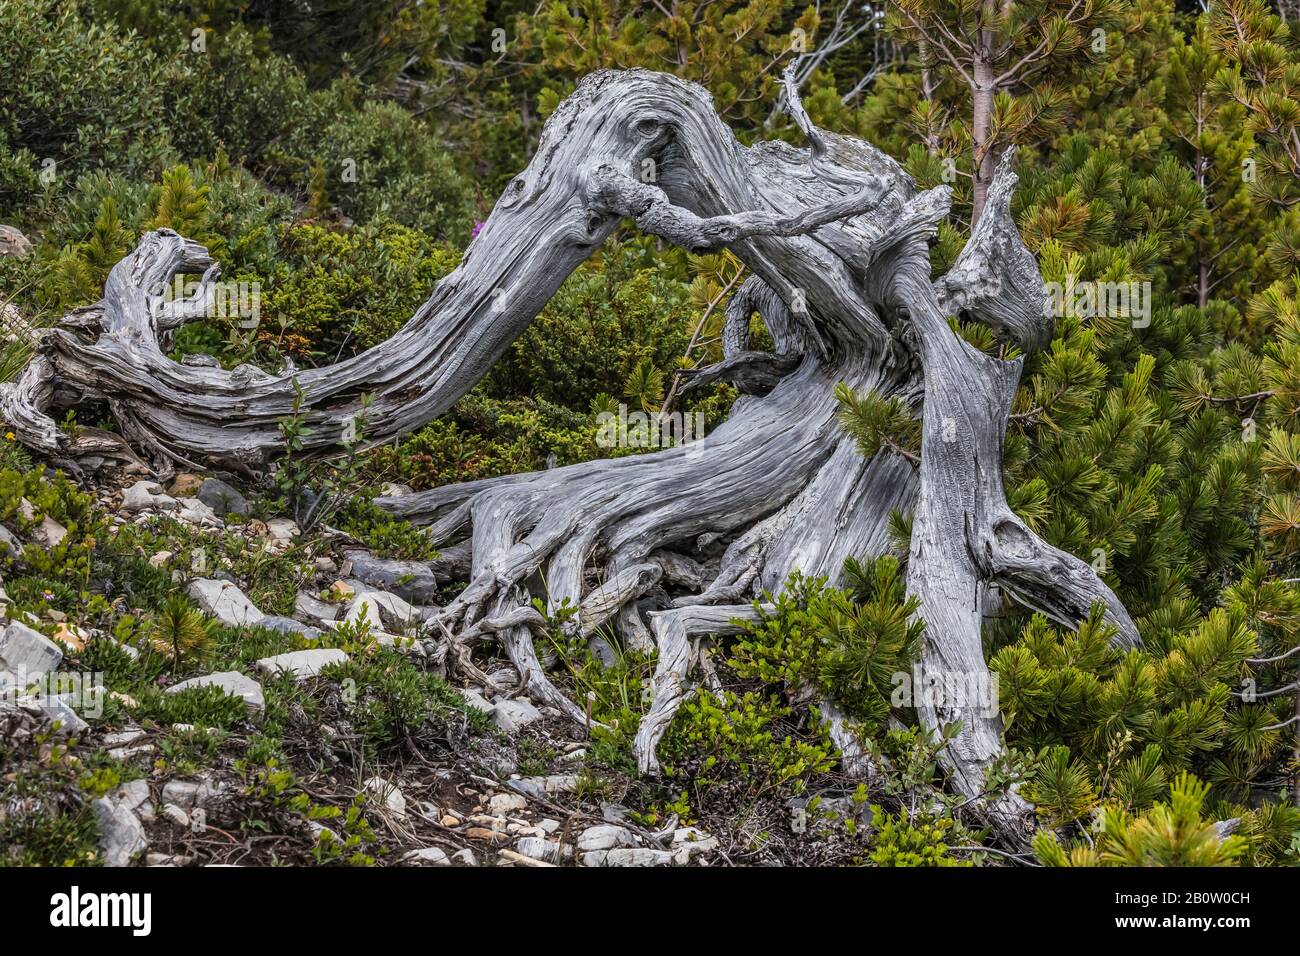 Whitebark Pine, Pinus albicaulis, older dead trunk with young krummholz trees at treeline in Mount Robson Provincial Park, British Columbia, Canada Stock Photo